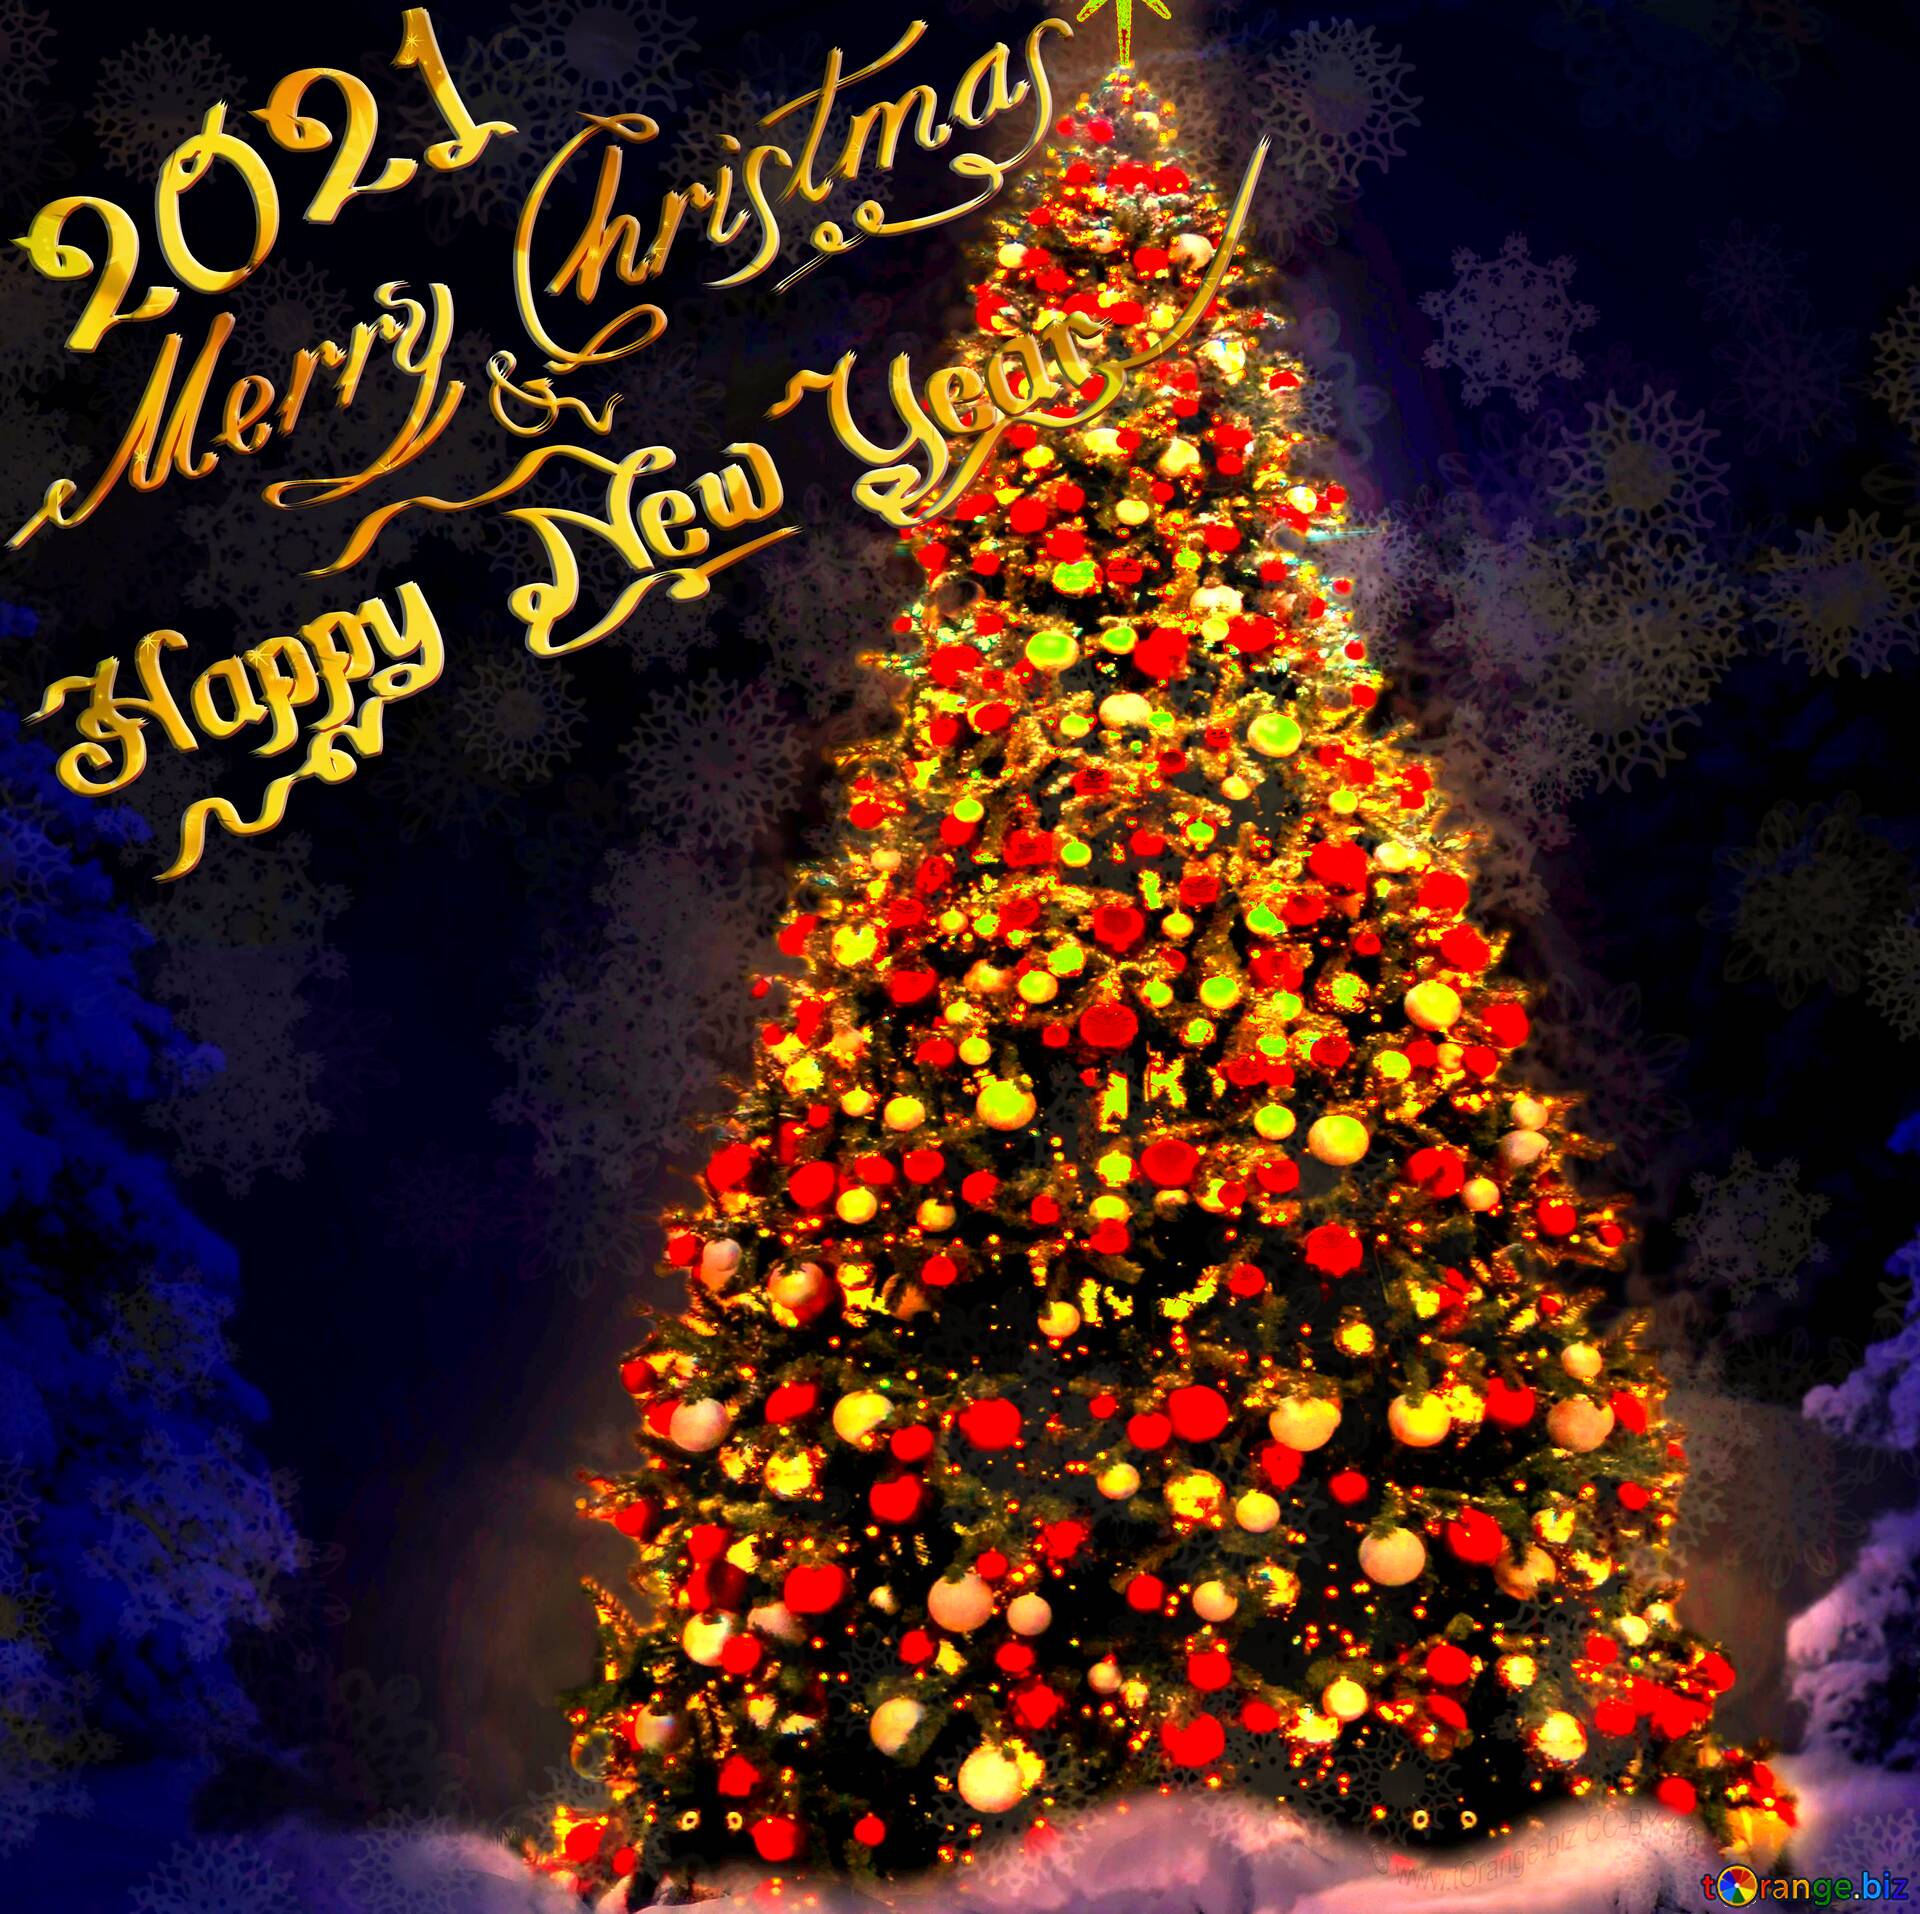 Download Free Picture 2021 Merry Christmas On CC BY License Free Image Stock TOrange.biz Fx №141114